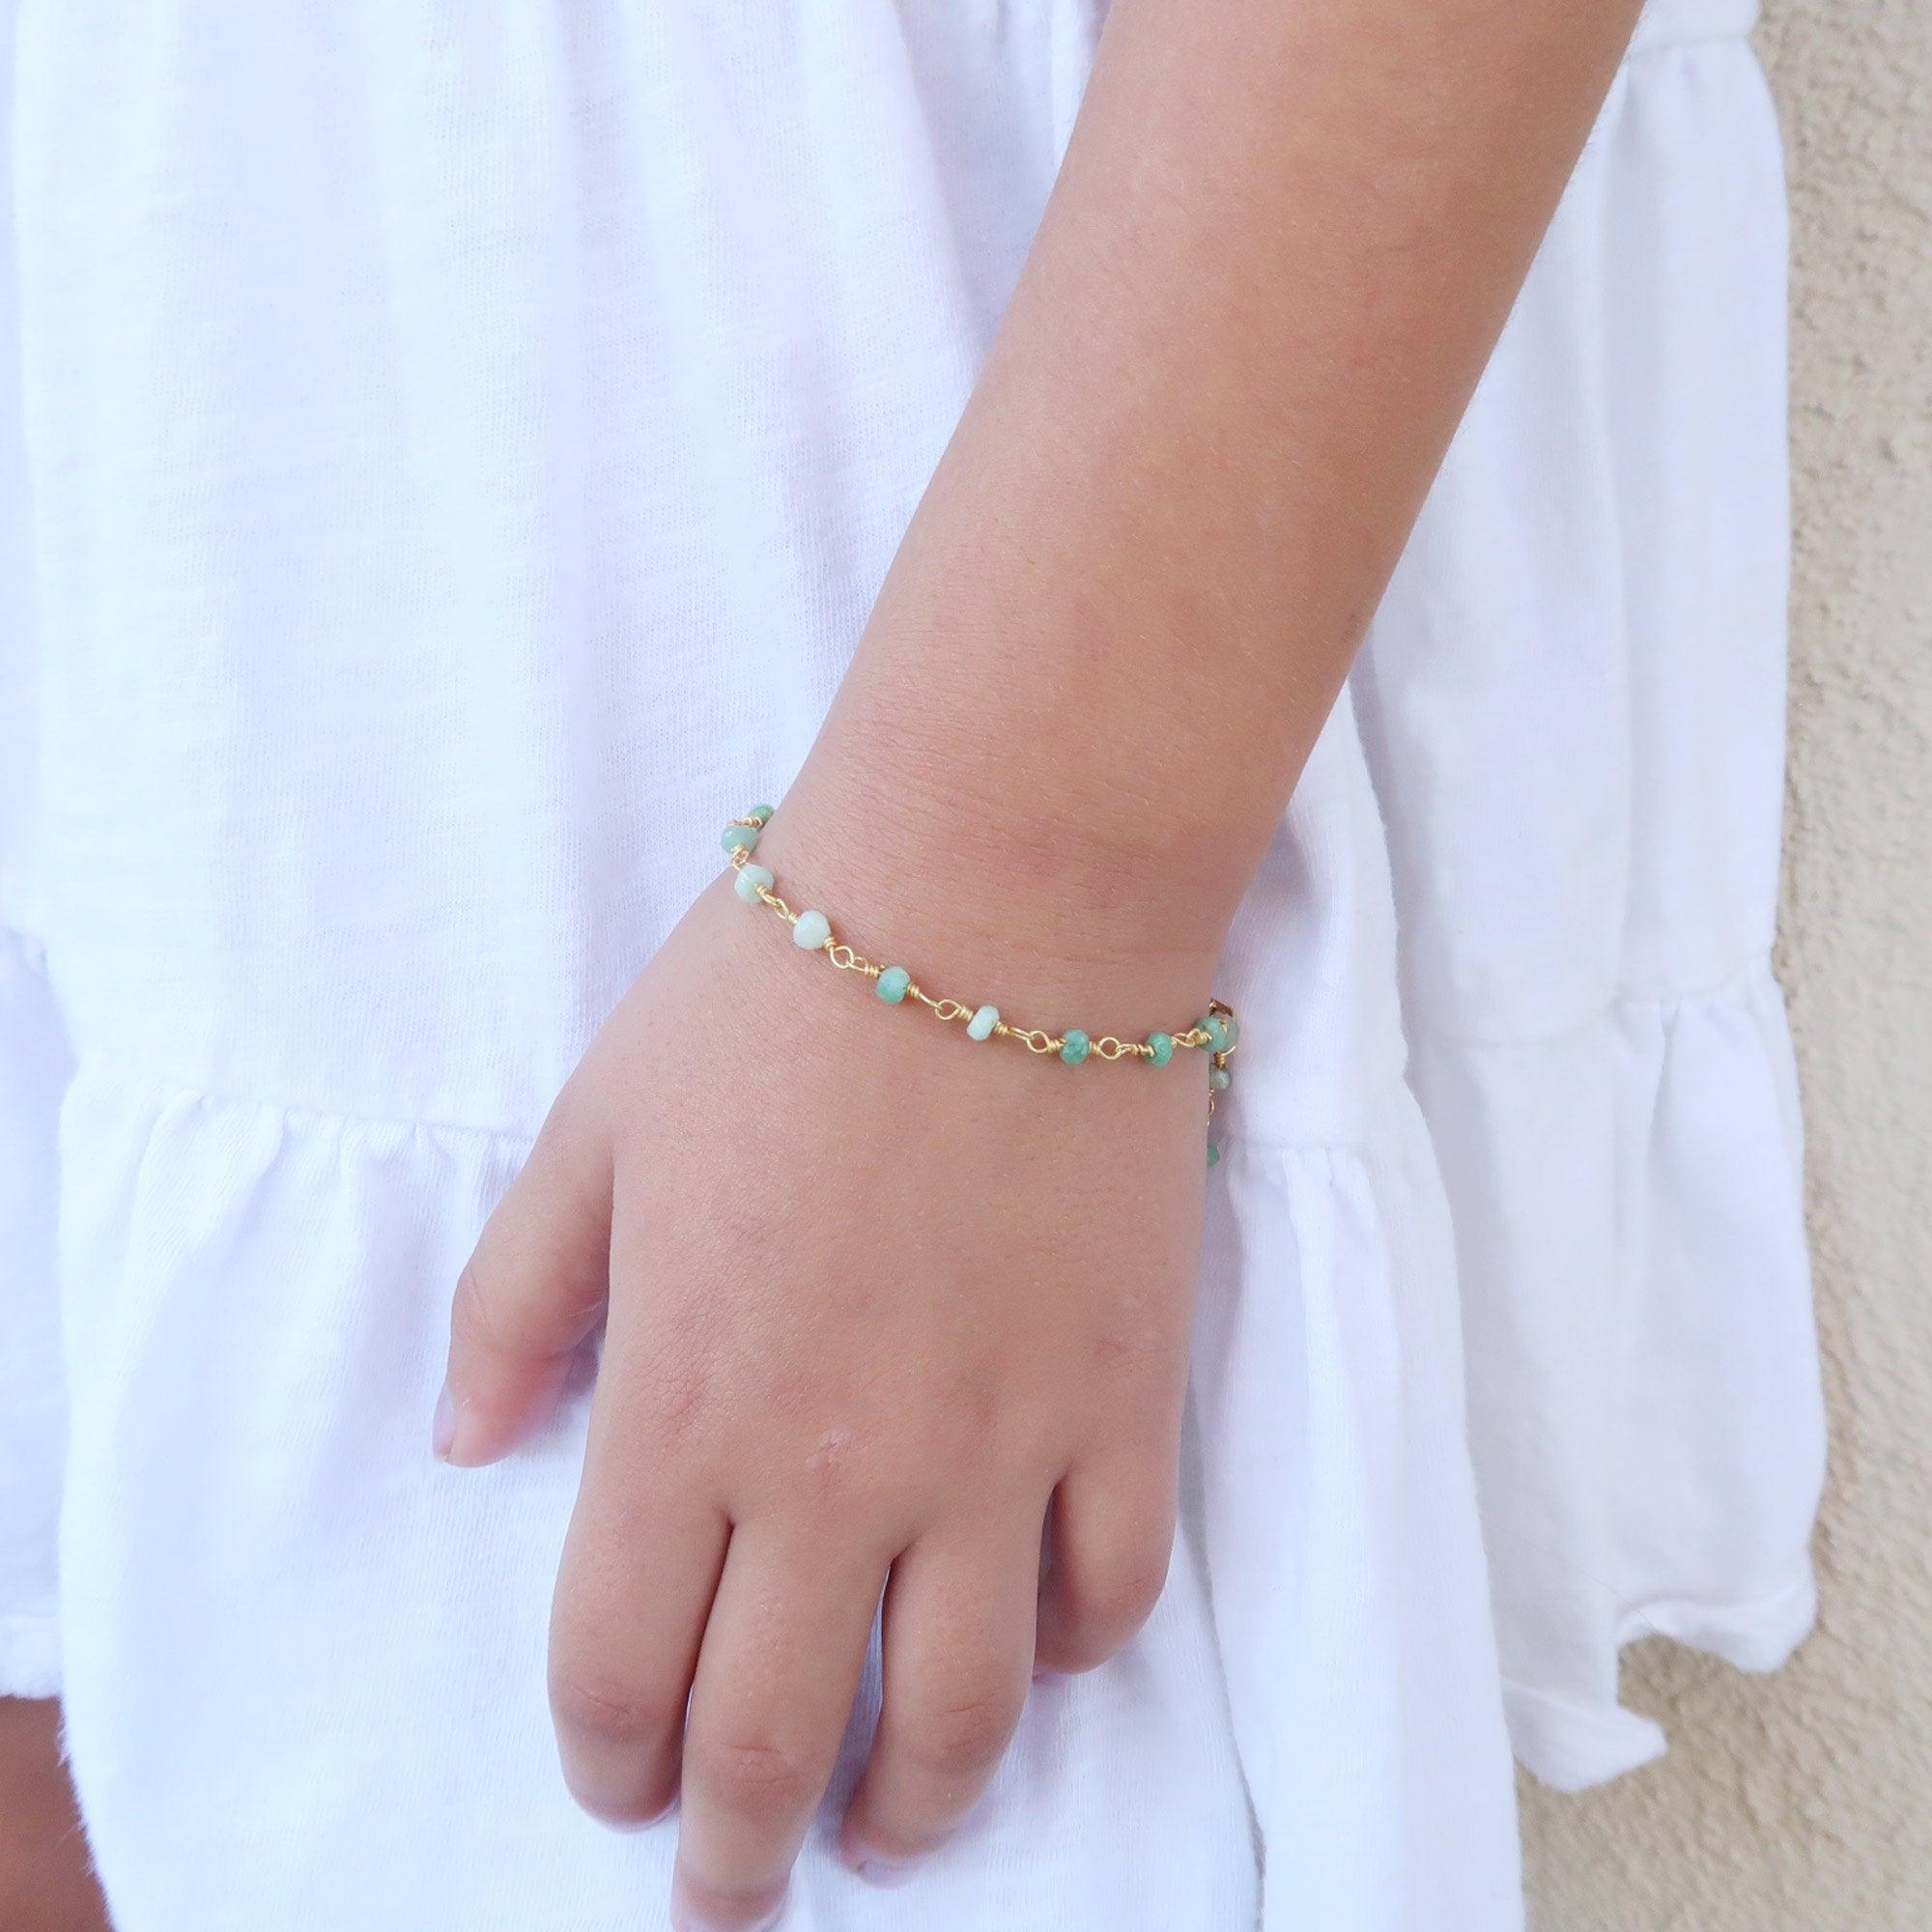 Amazonite healing gemstone bracelet for kids to empower and encourage them to be more active. 